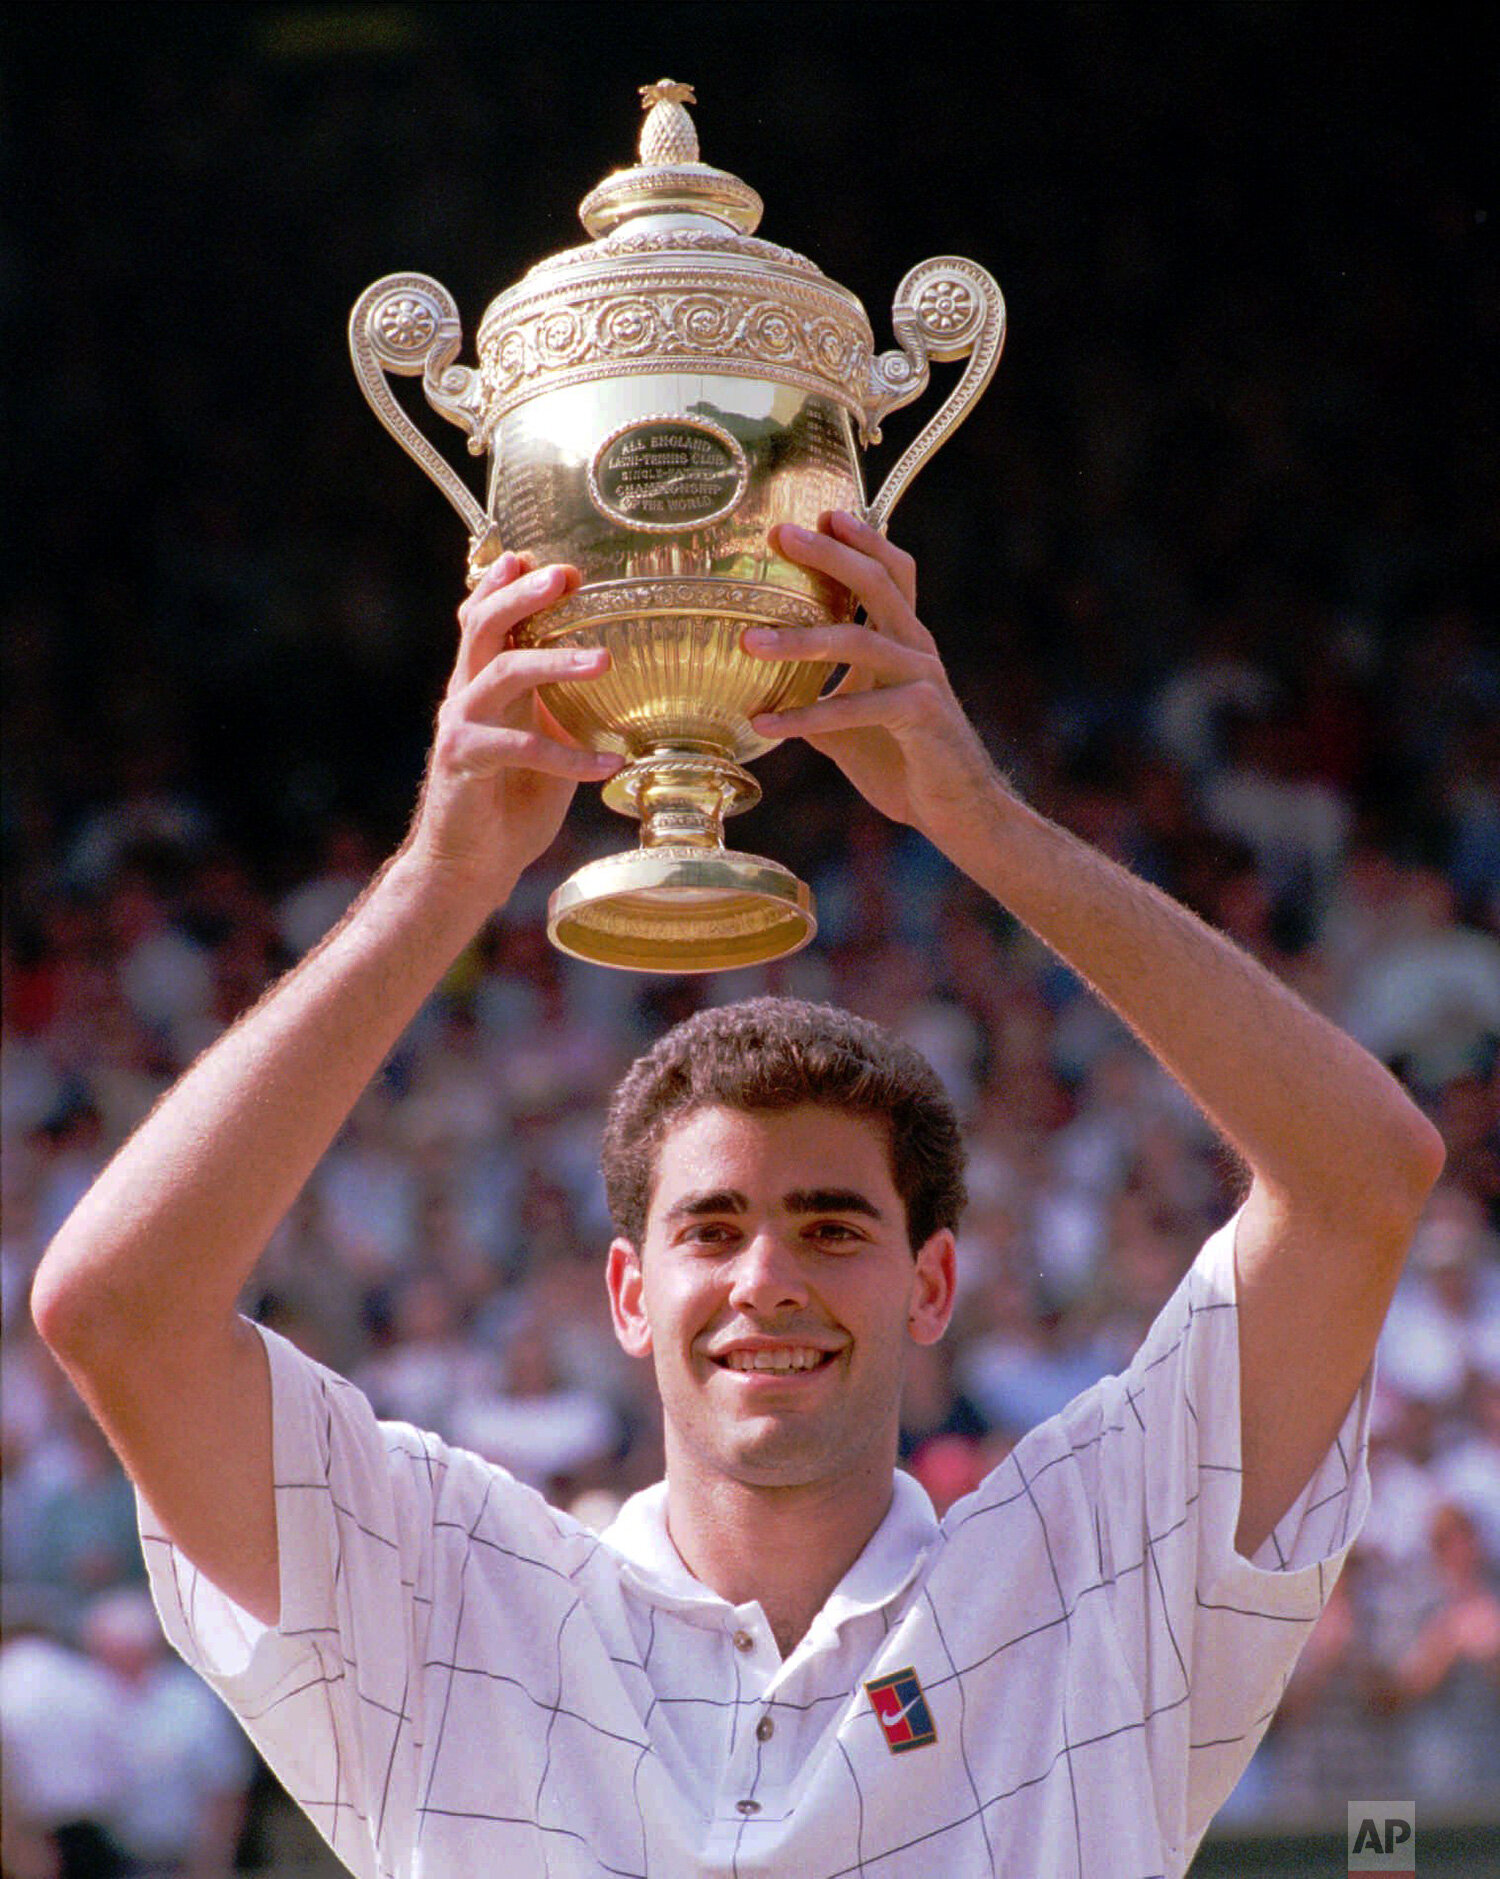  Pete Sampras holds his trophy, after defeating Boris Becker to win the men's singles final on Centre Court at Wimbledon, Sunday, July 9, 1995. Sampras defeated Becker 6-7 (5-7), 6-2, 6-4, 6-2 to win his third consecutive championship. (AP Photo/Dave